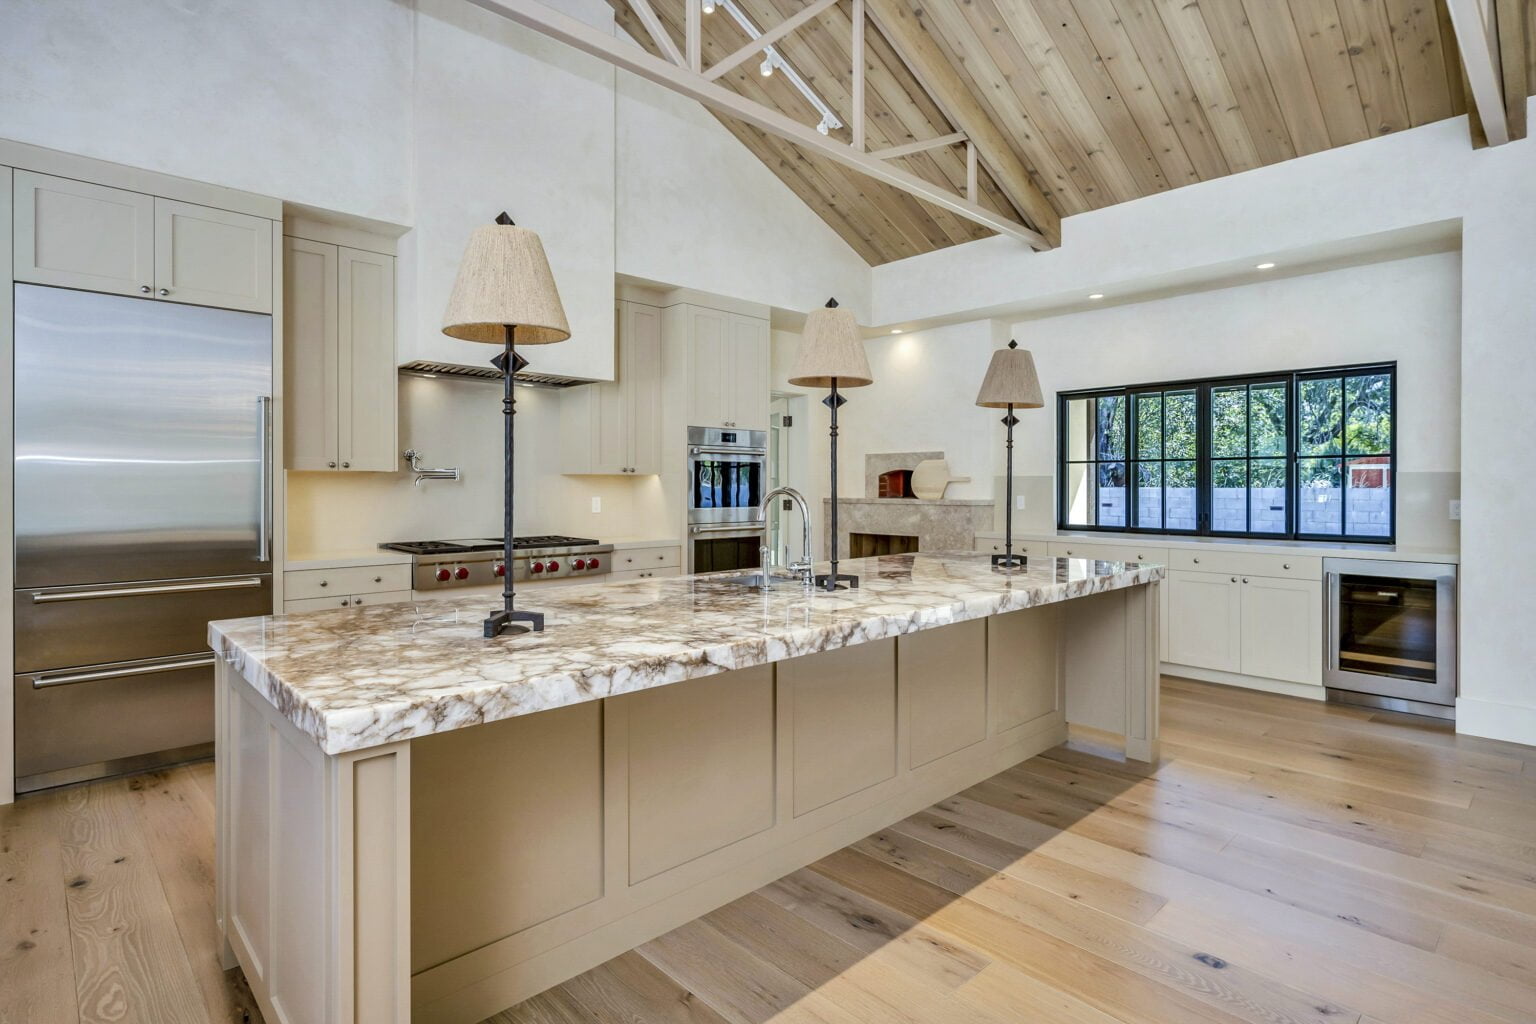 Large island in the center of the kitchen of Santa Rosa Hills Custom Transitional Rebuild